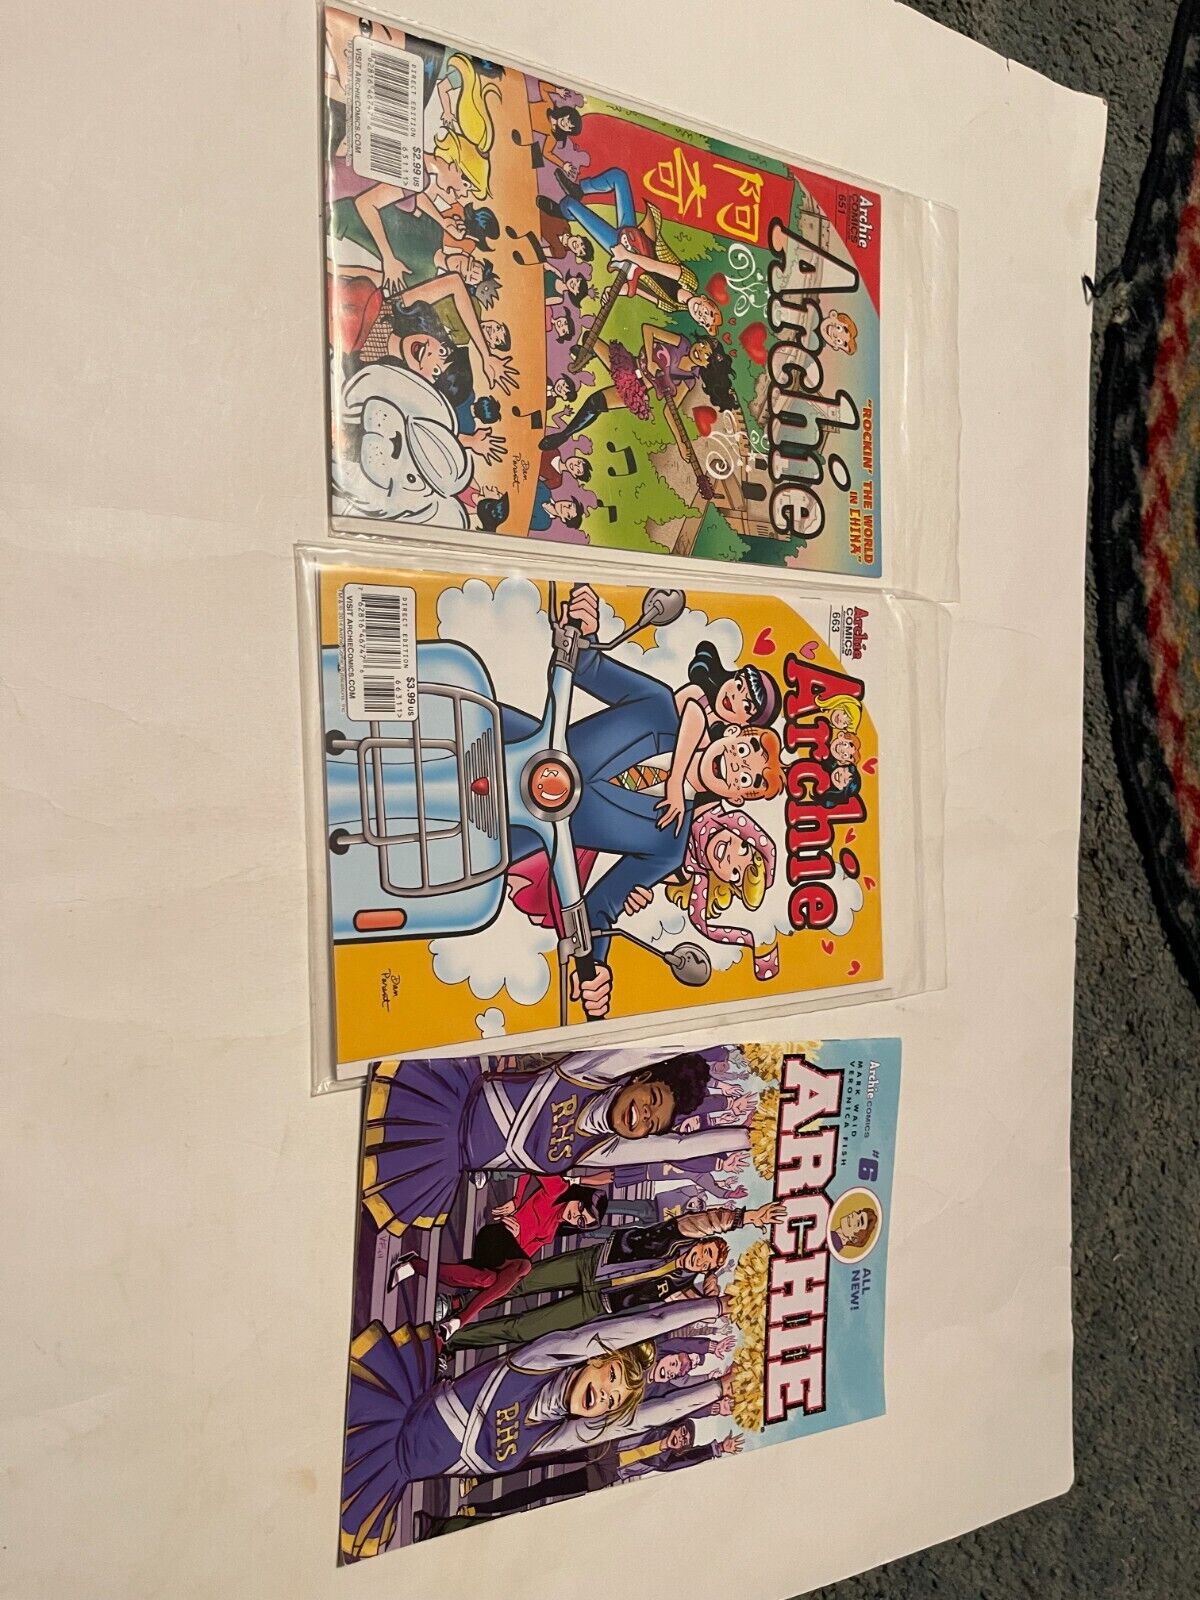 Lot of 9 ARCHIE SERIES COMIC BOOKS 600 SERIES 651,663,648,646,644,647,657,645